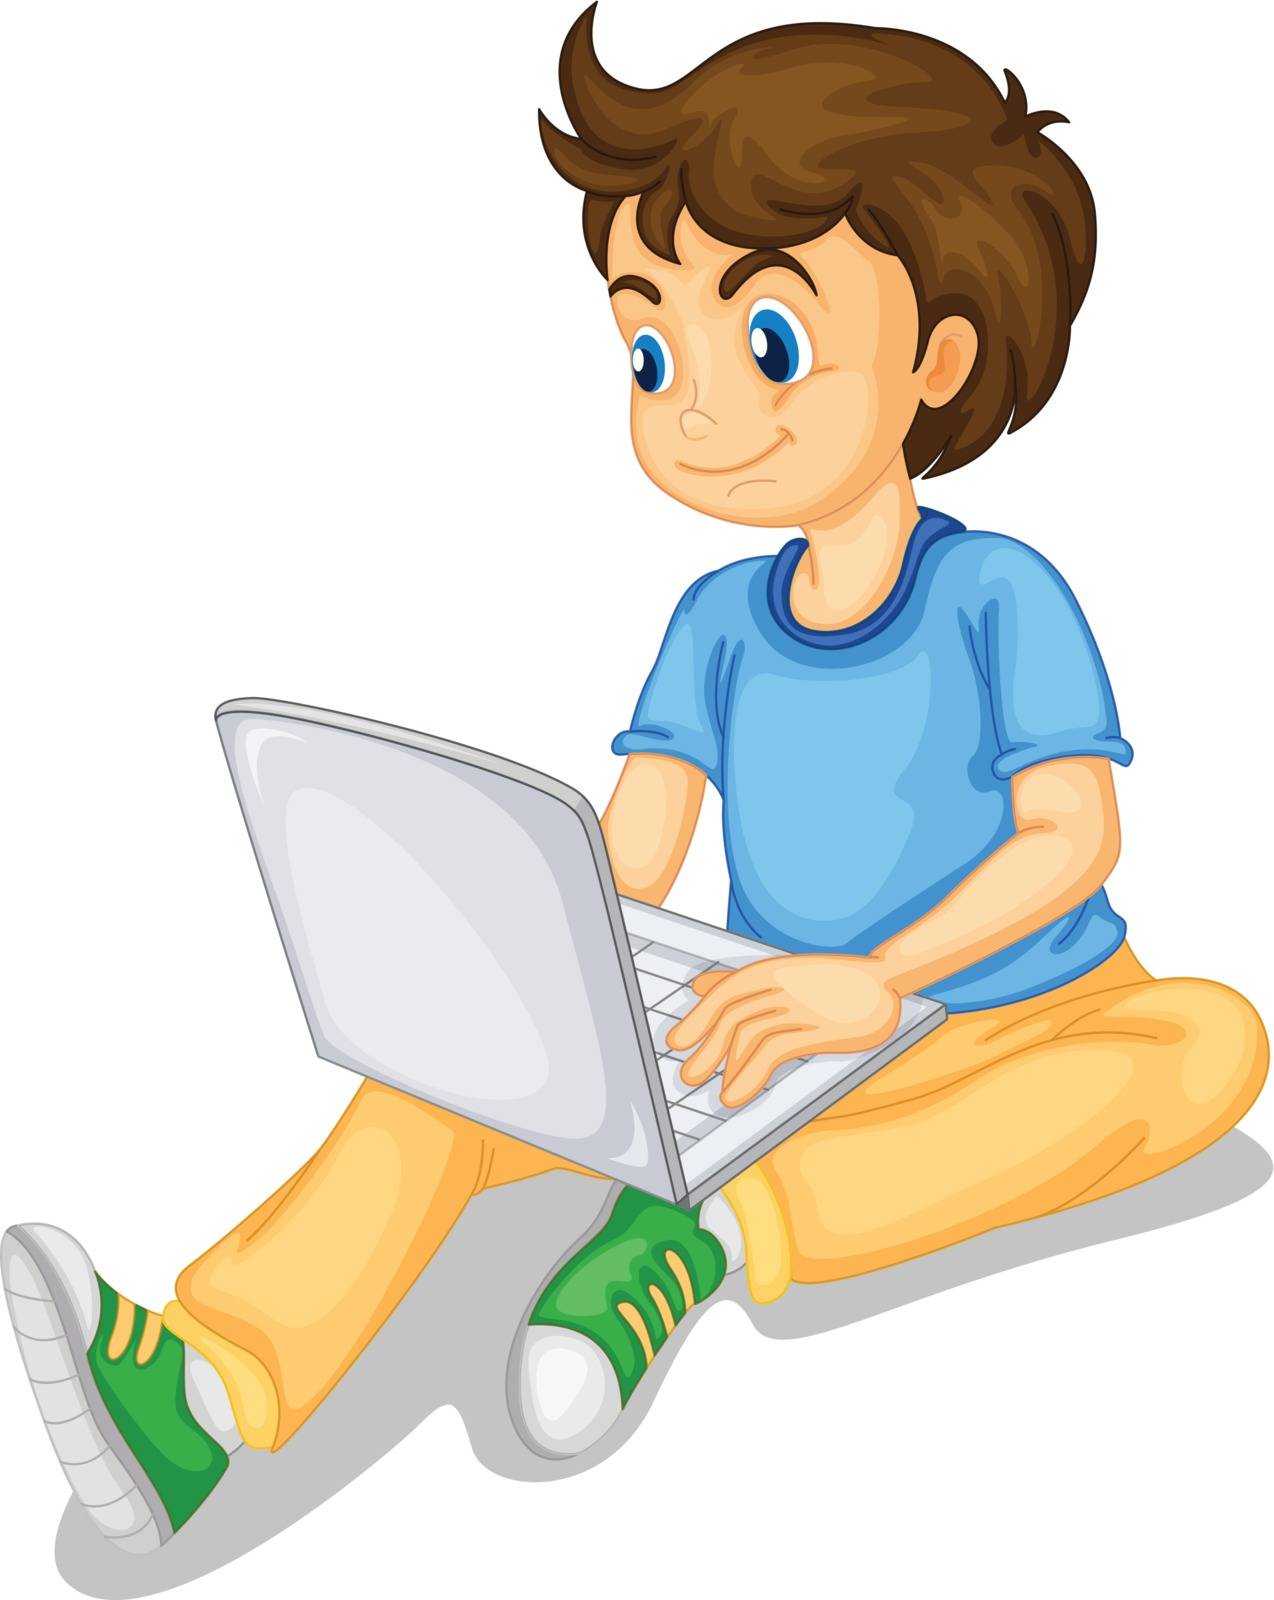 illustration of a boy and laptop on a white